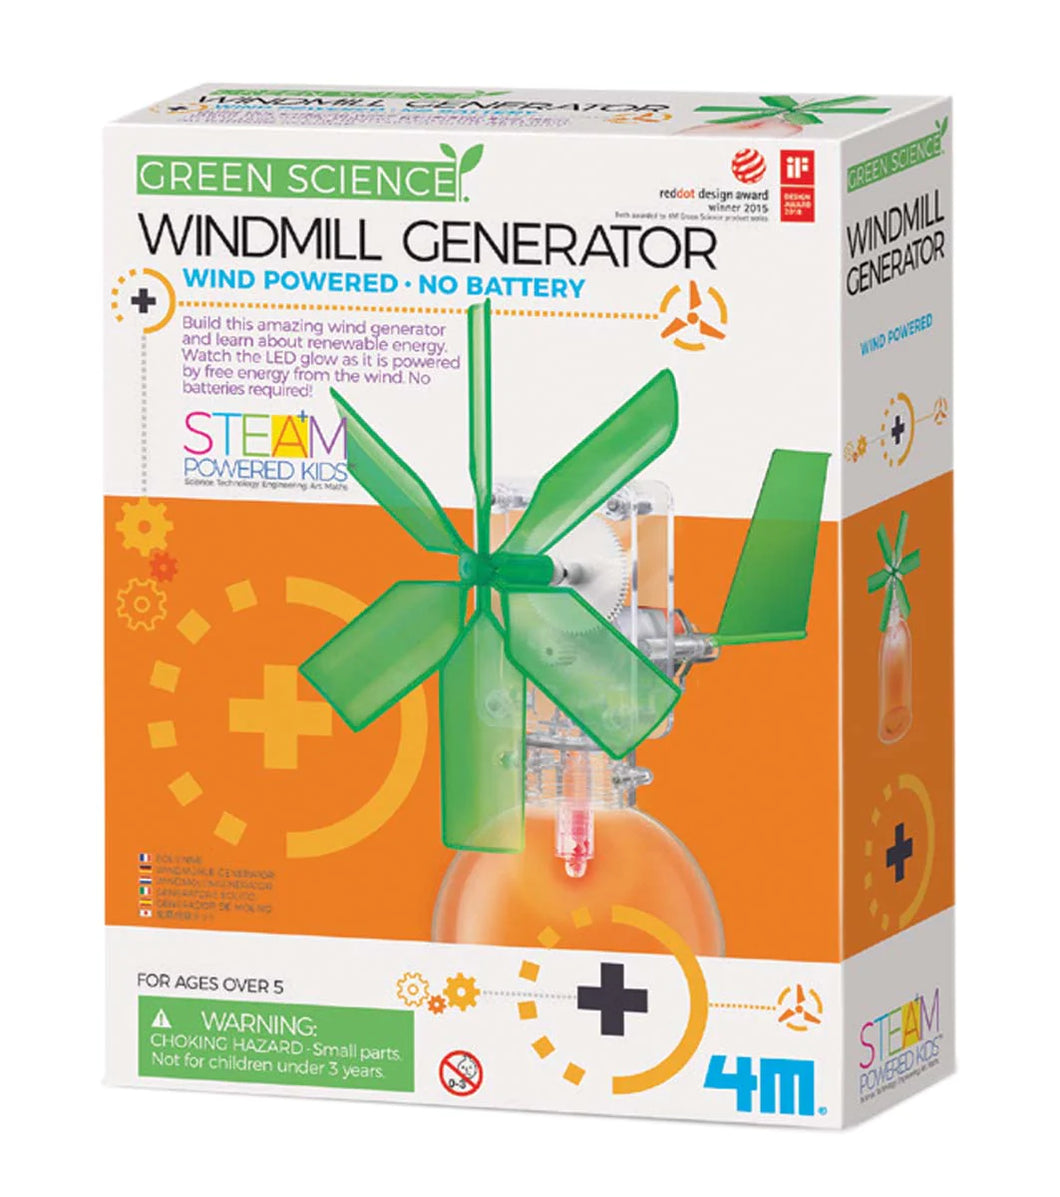 Toysmith Windmill Generator with no battery wind powered green 5 inches generator on white box with orange and green label against white background.